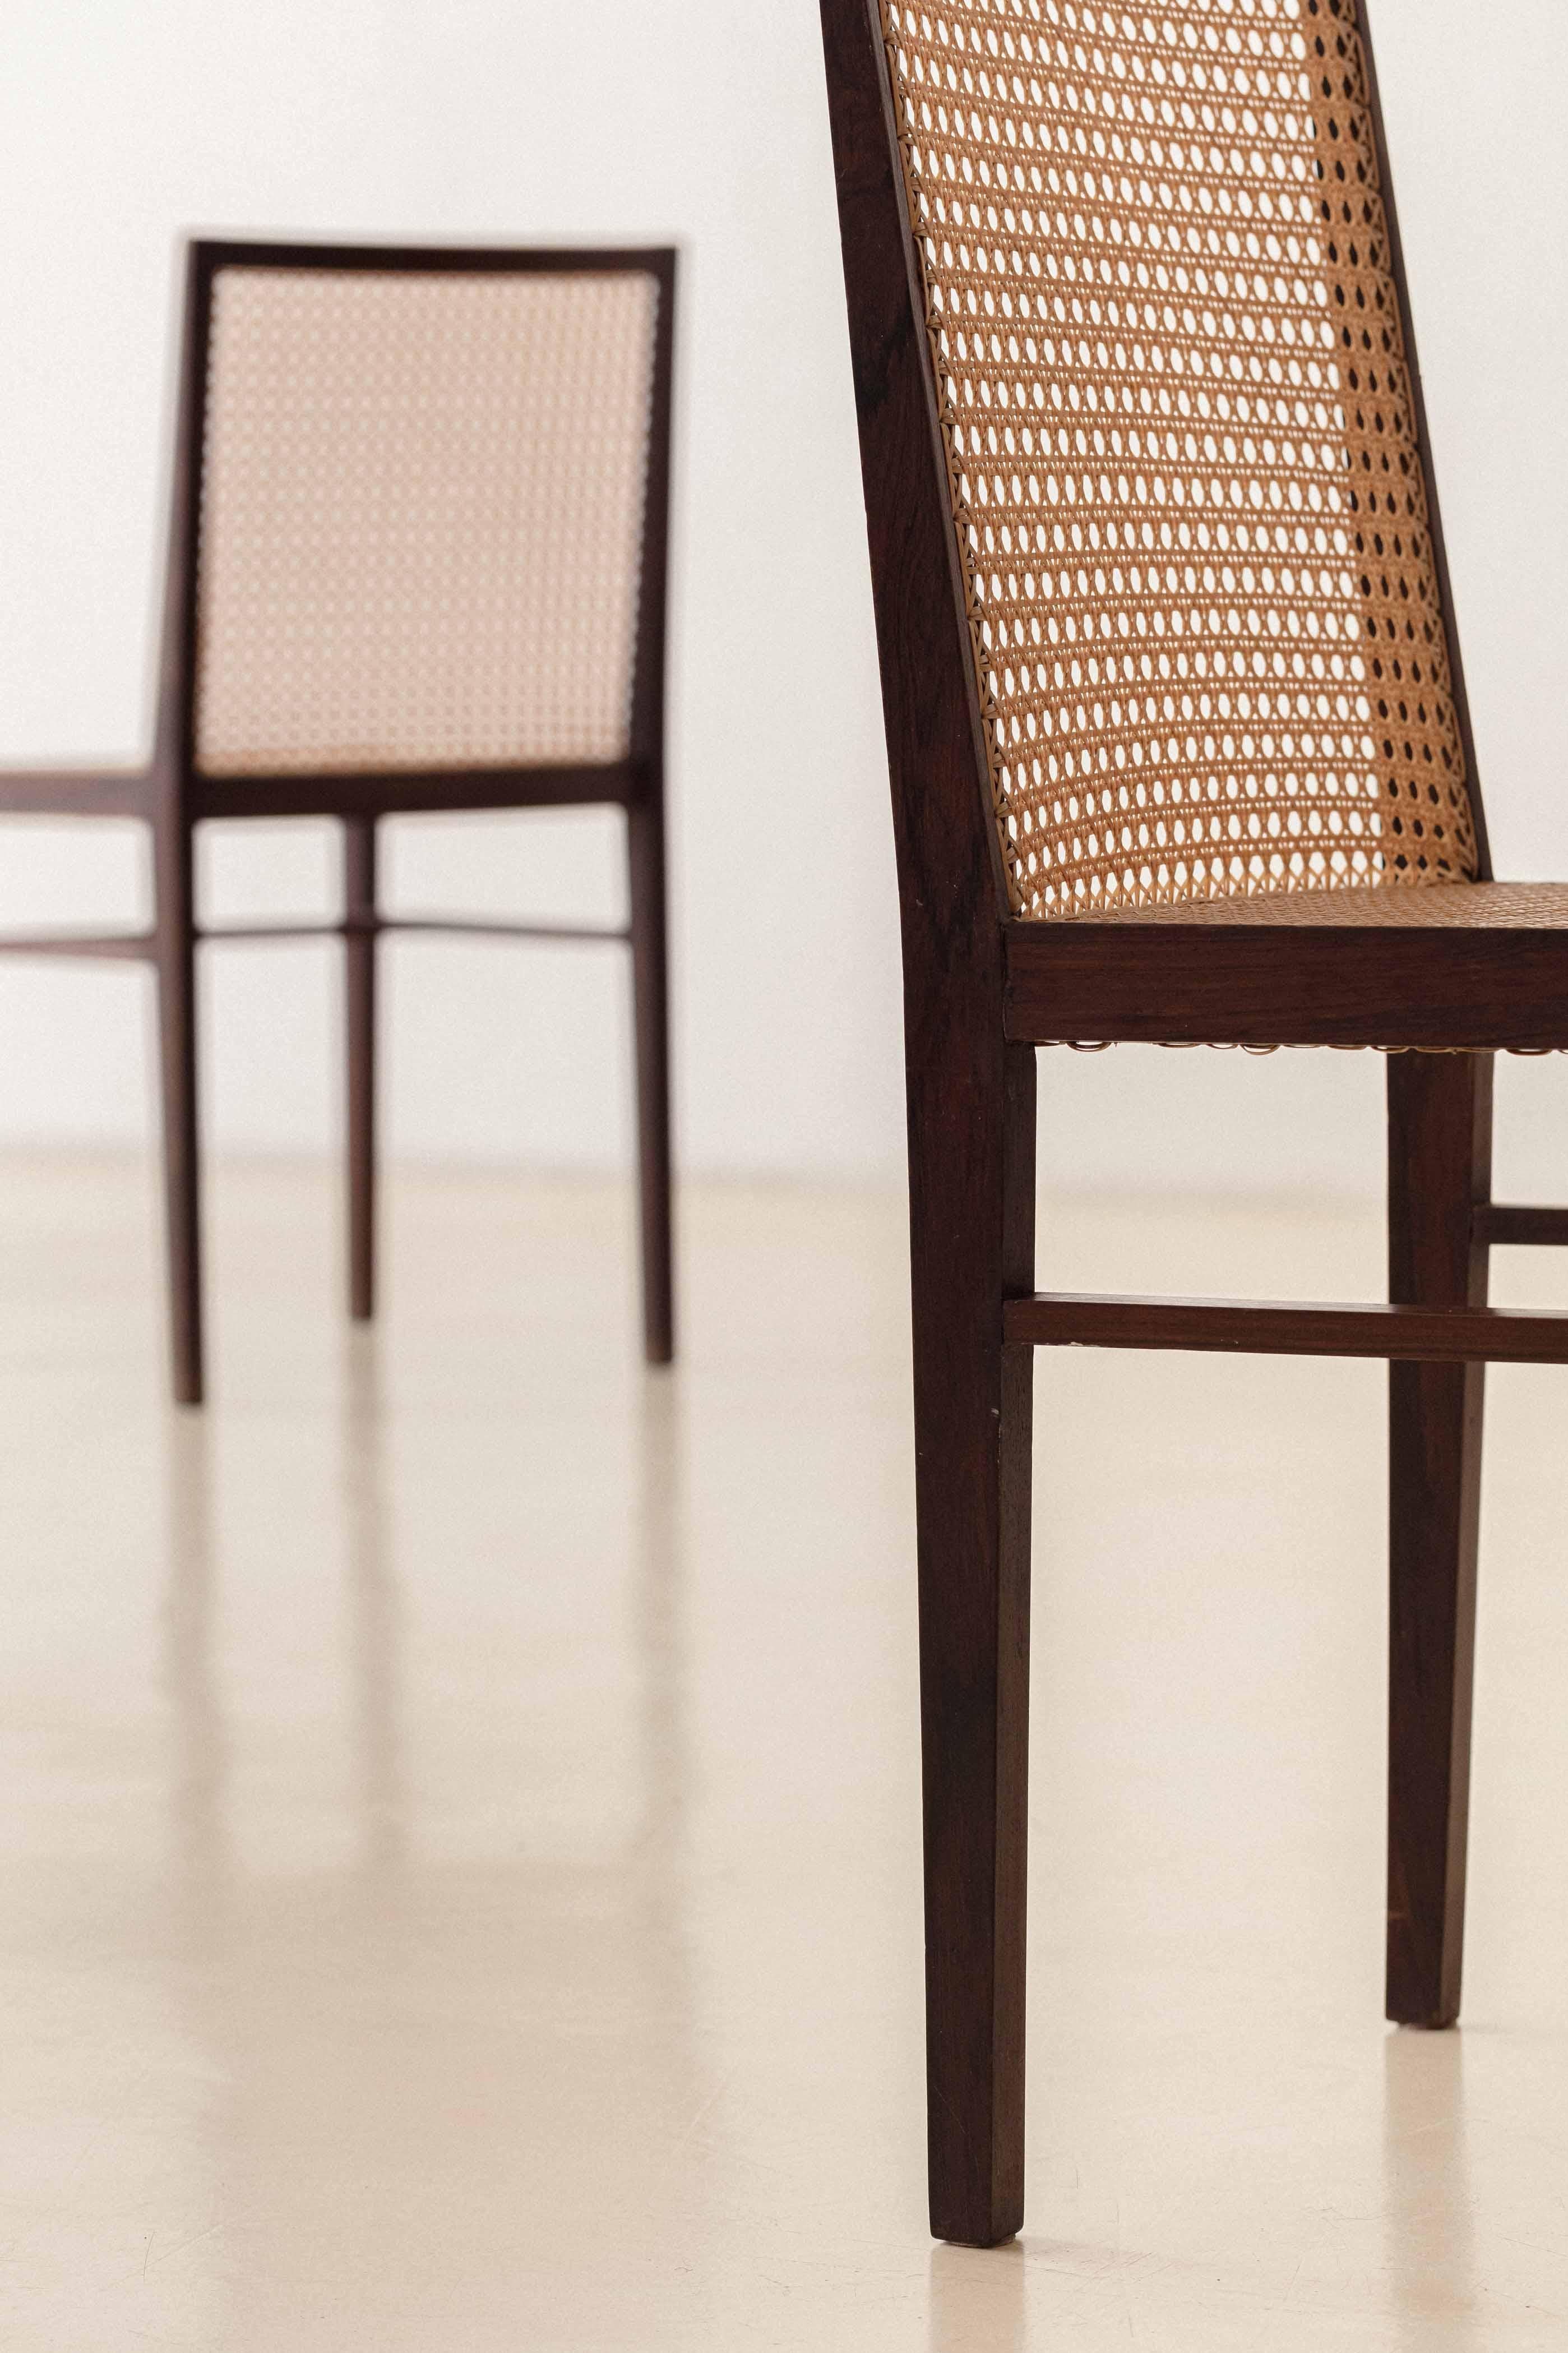 Set of Six Rosewood and Cane Dining Chairs, Brazilian Midcentury Design, 1960s For Sale 4